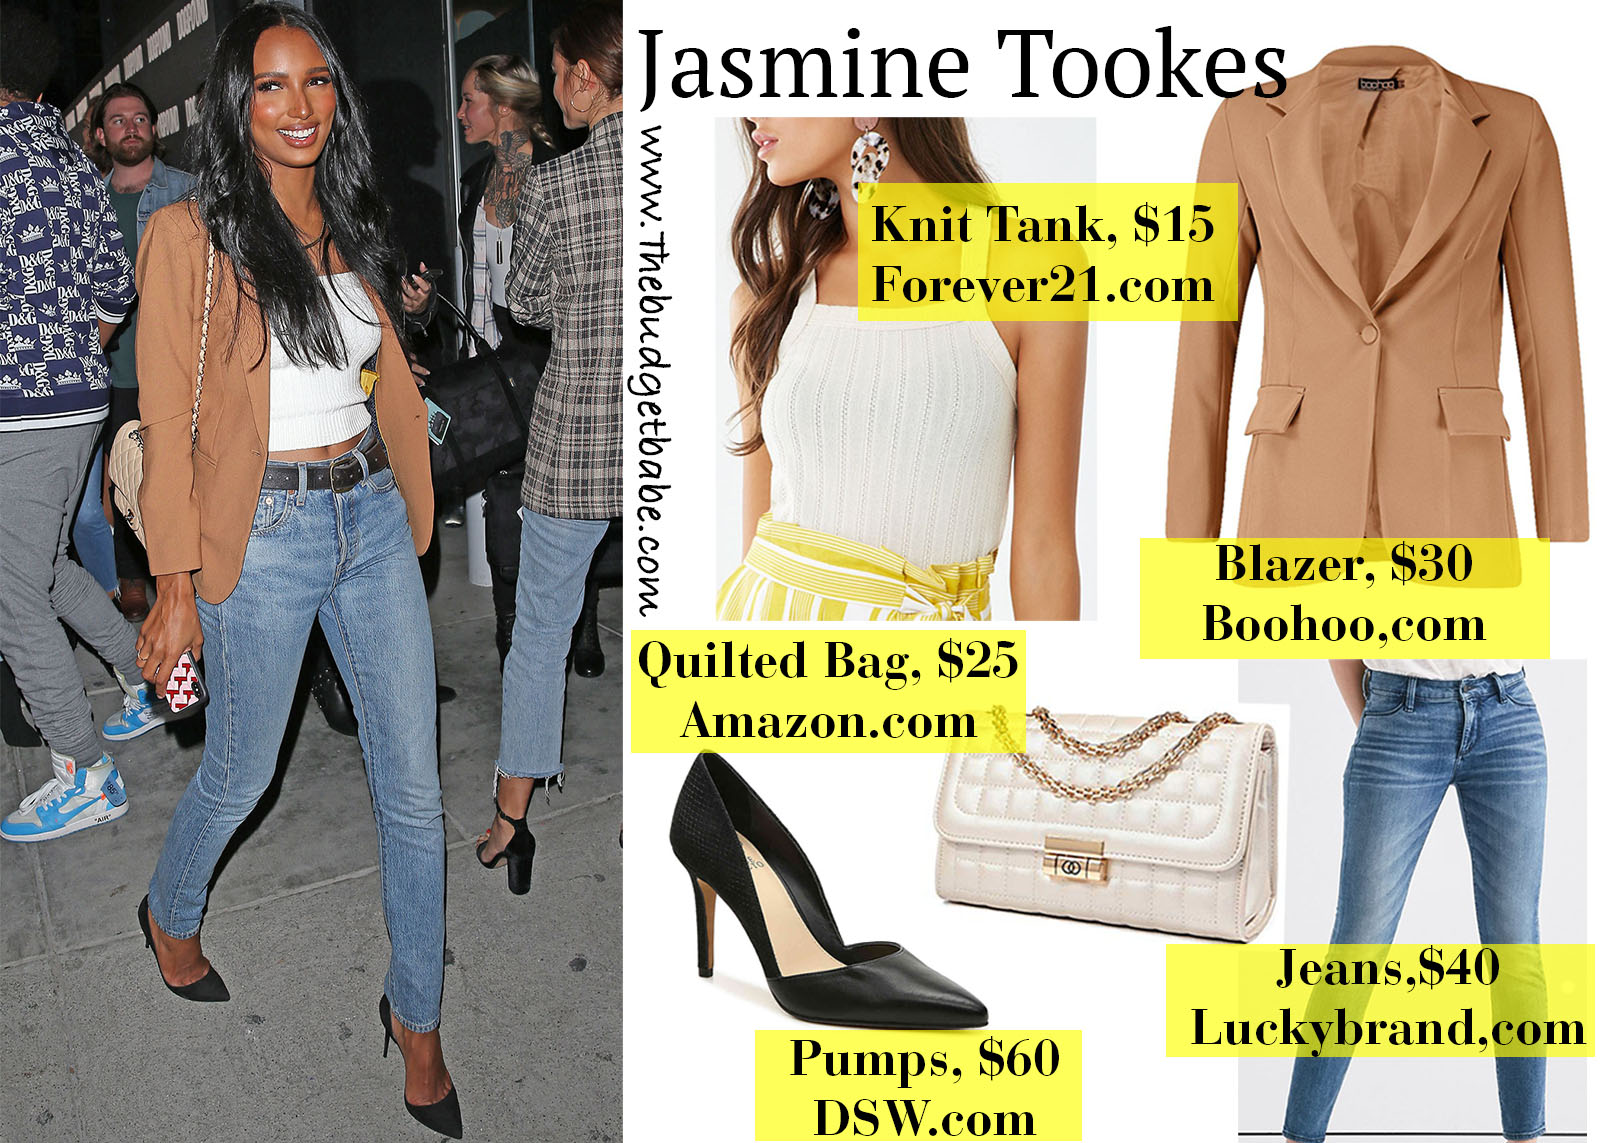 Jasmine Tookes Camel Blazer and Jeans Look for Less